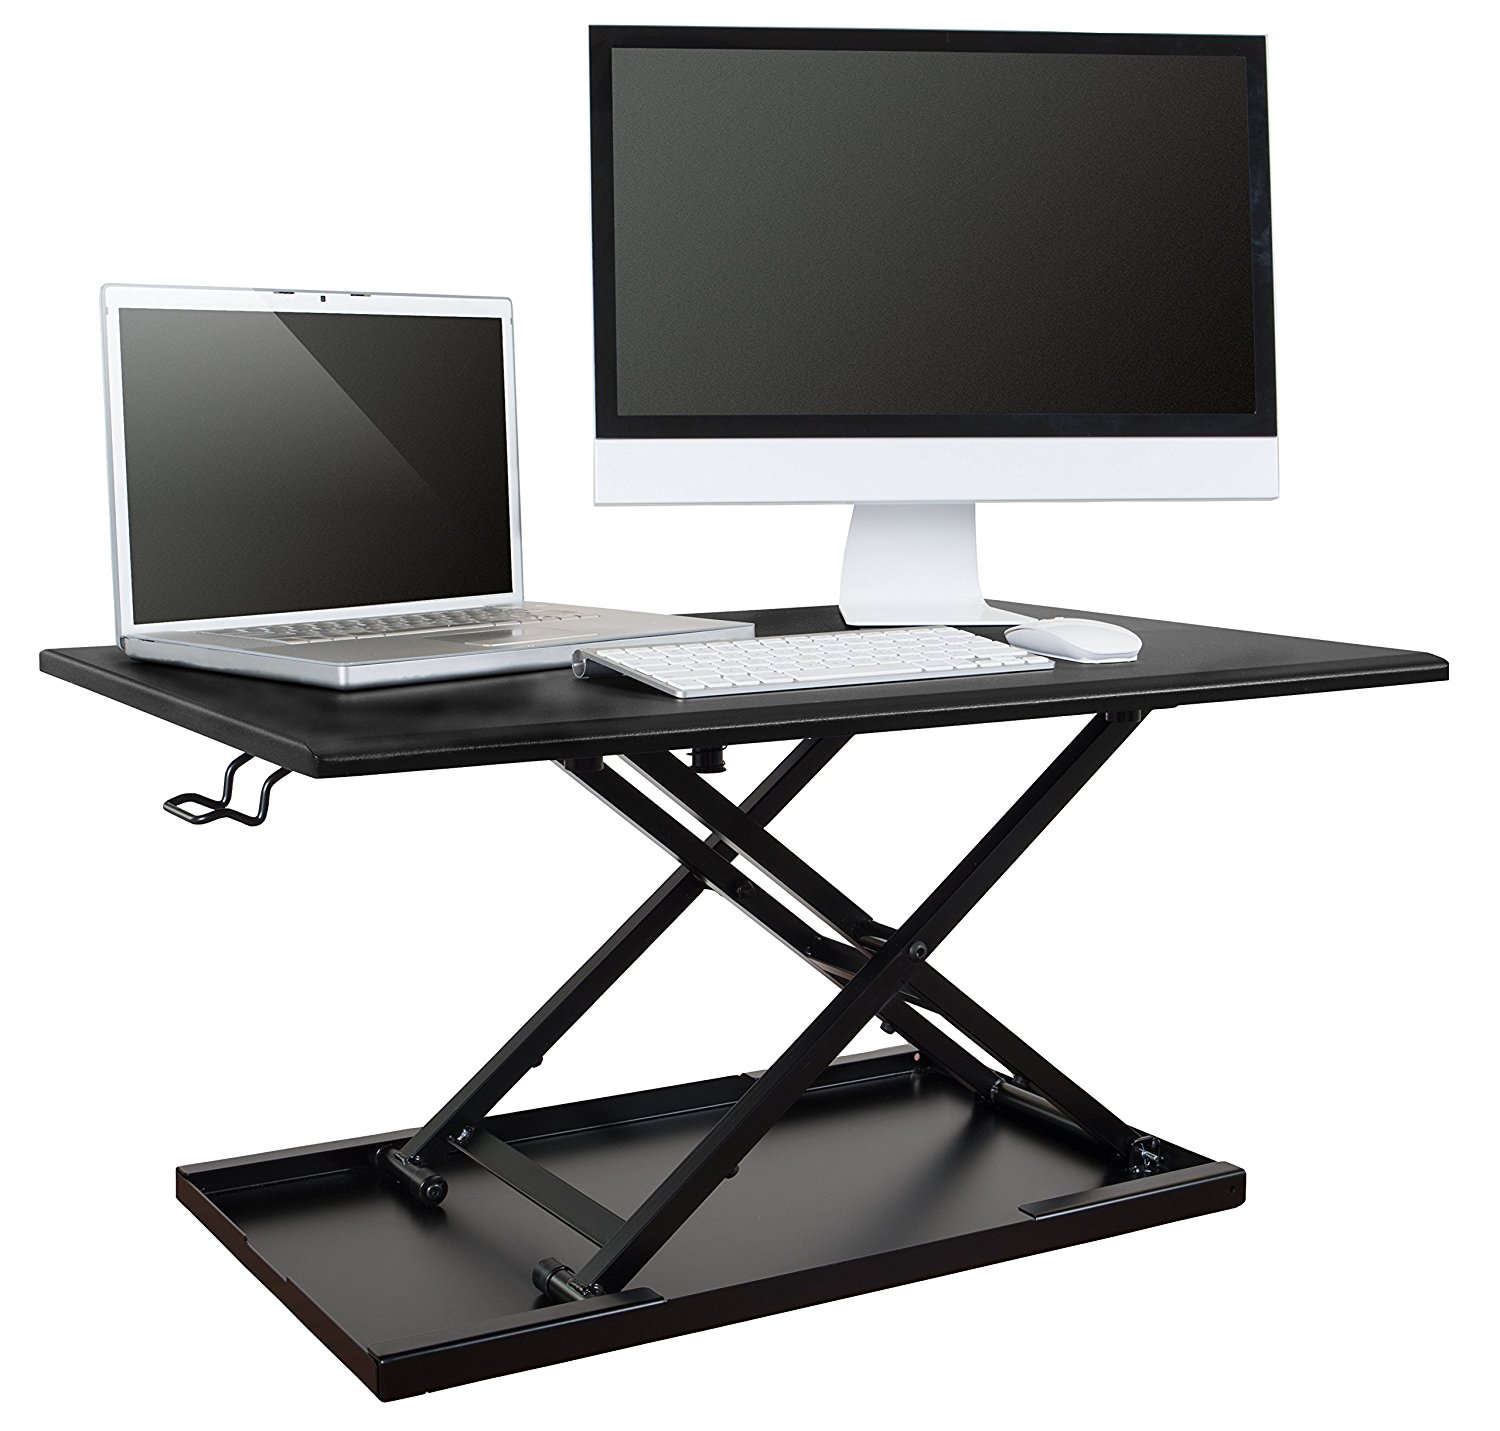 Review of AirRise Pro Standing Desk Converter a Adjustable Height, Two Tier